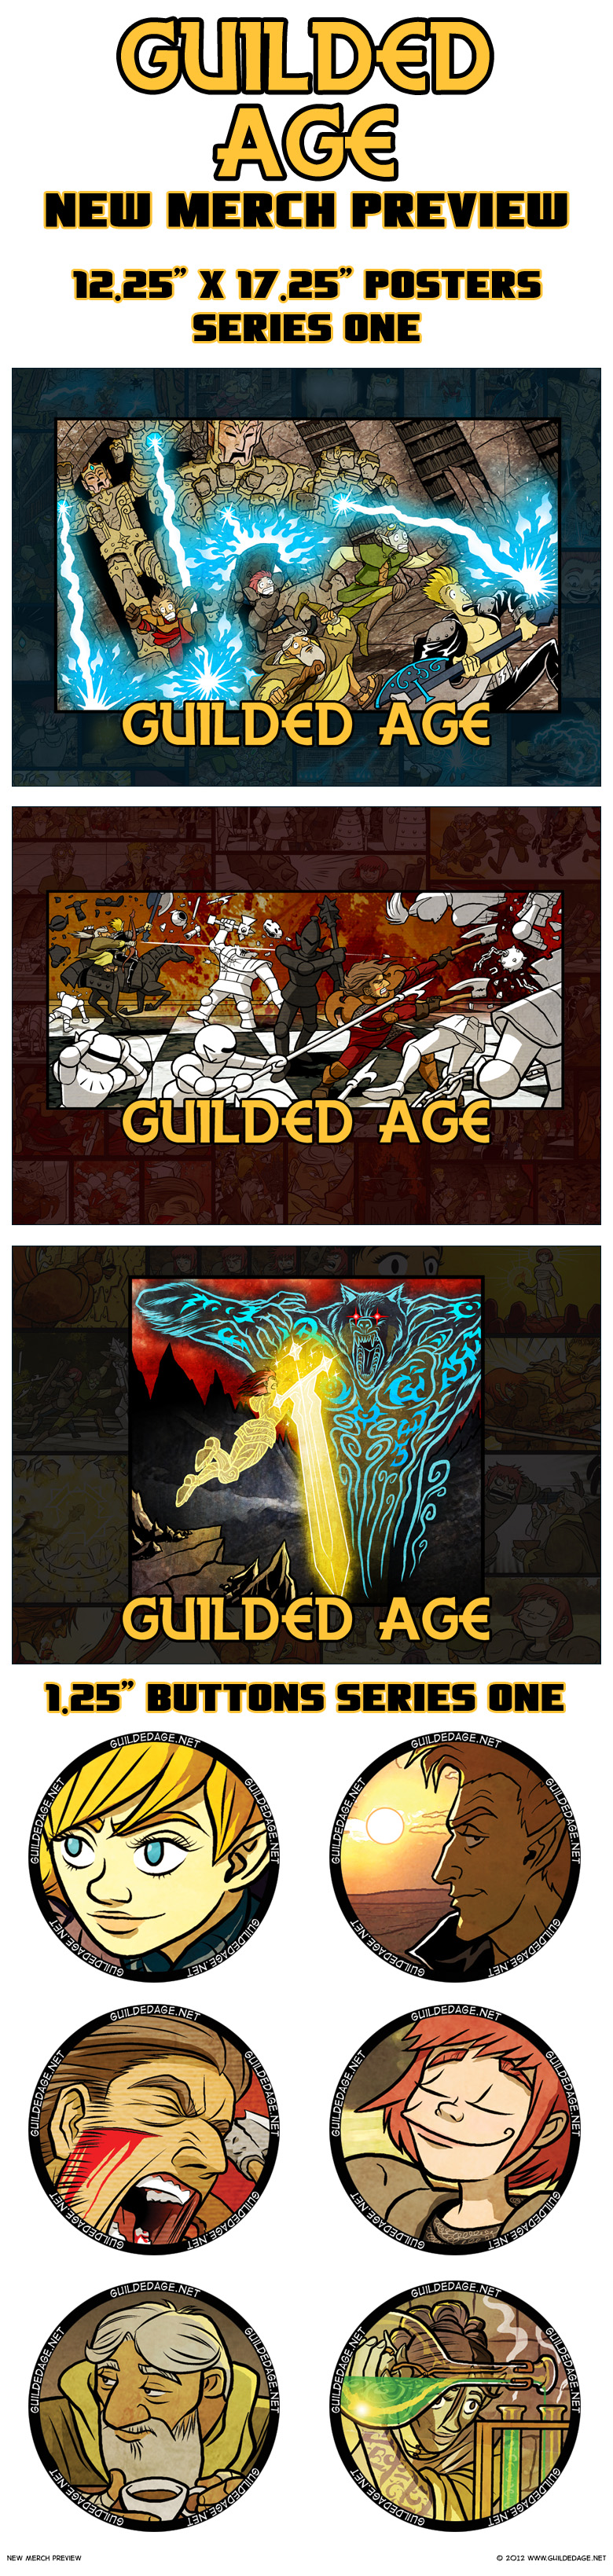 The Guilded Age fragrance line didn't test so well. 'Graiya's Wrath' was an unusually sweet-smelling apocalypse, but 'Gravedust's Desert Wanderings' was a little too dry to appreciate, and the less said the better about 'Frigg's Armpit.'